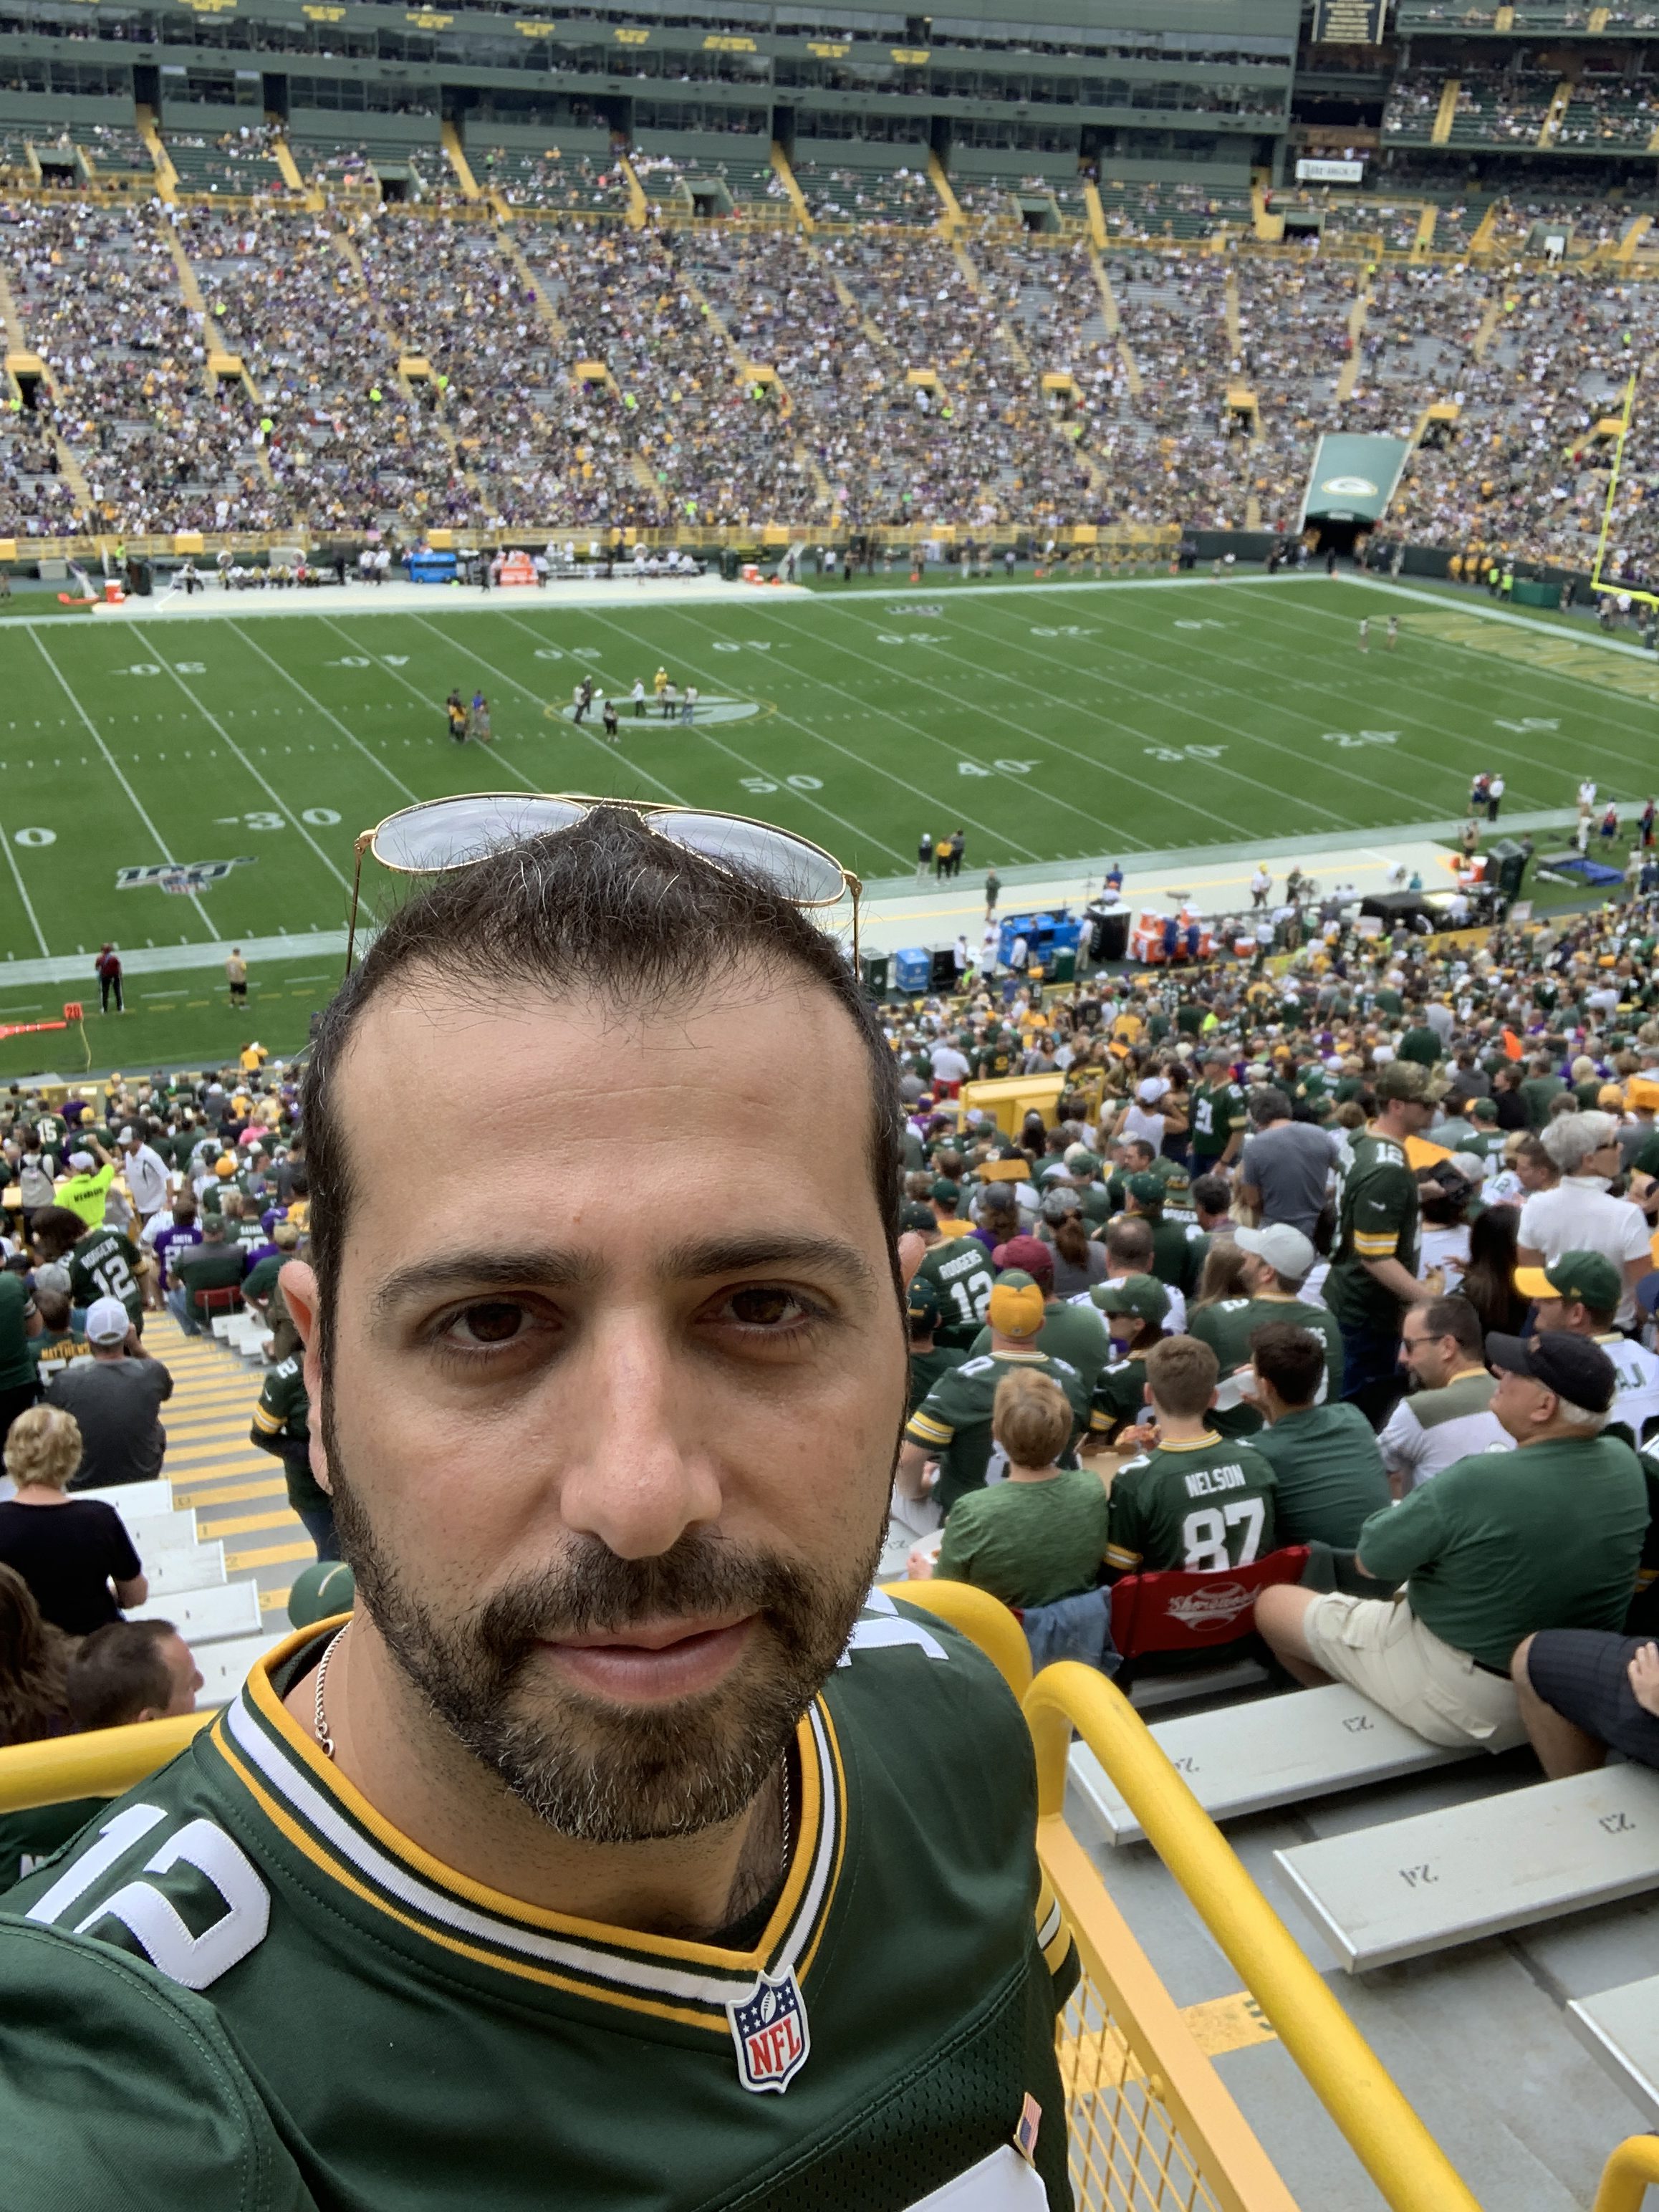 My (new) periodic Packers coverage – The 49ers Blowout :(